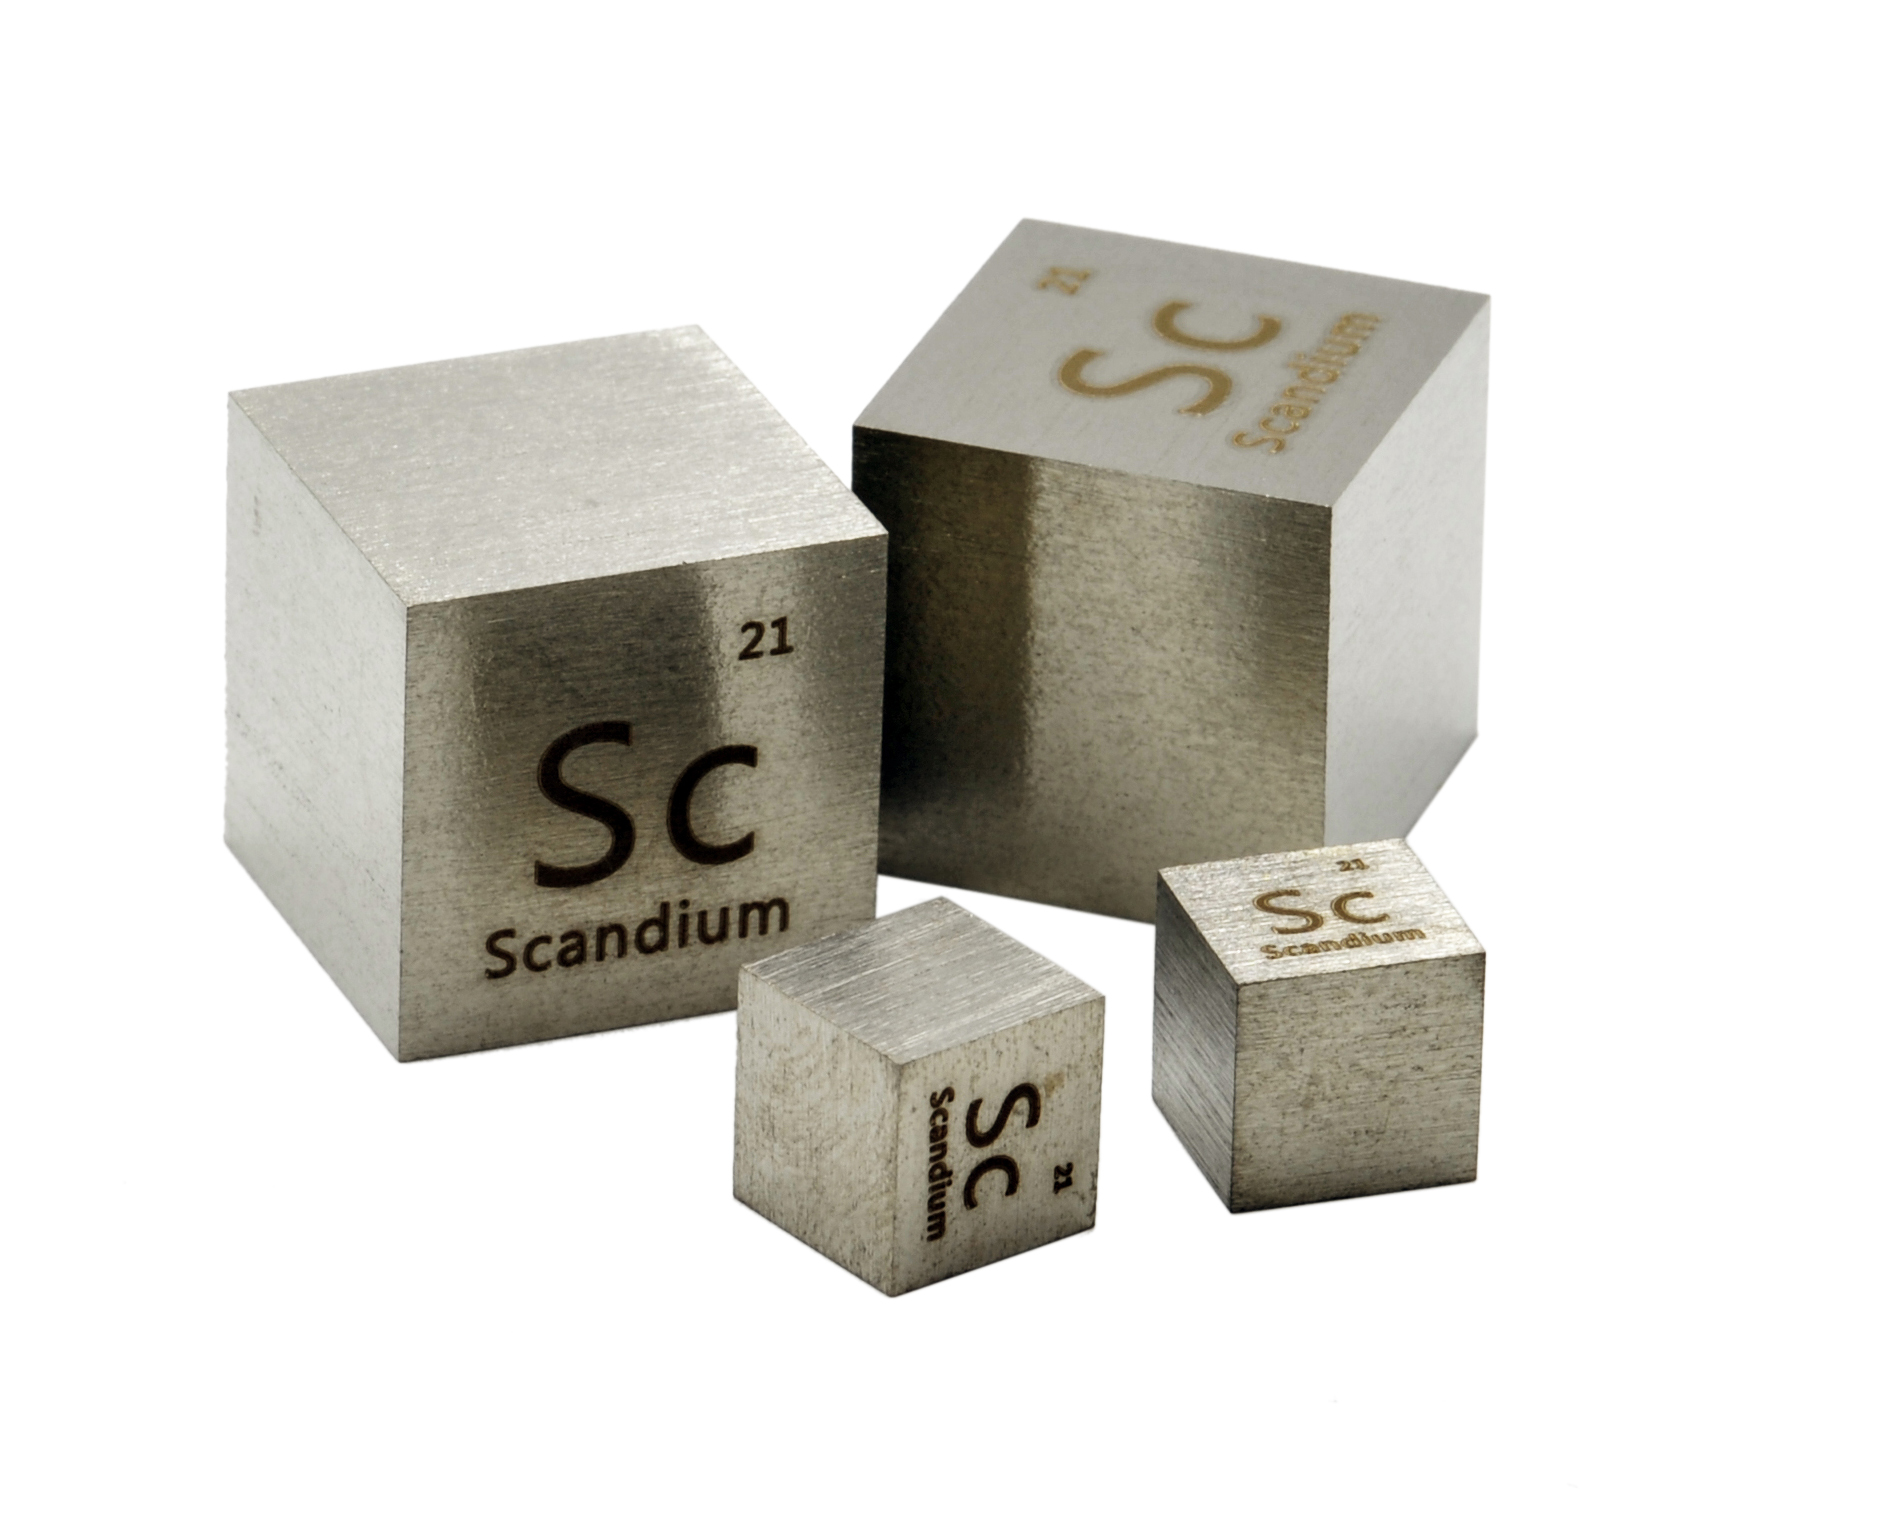 Scandium Metal 99.995% Pure 1 Gram for Element Collection